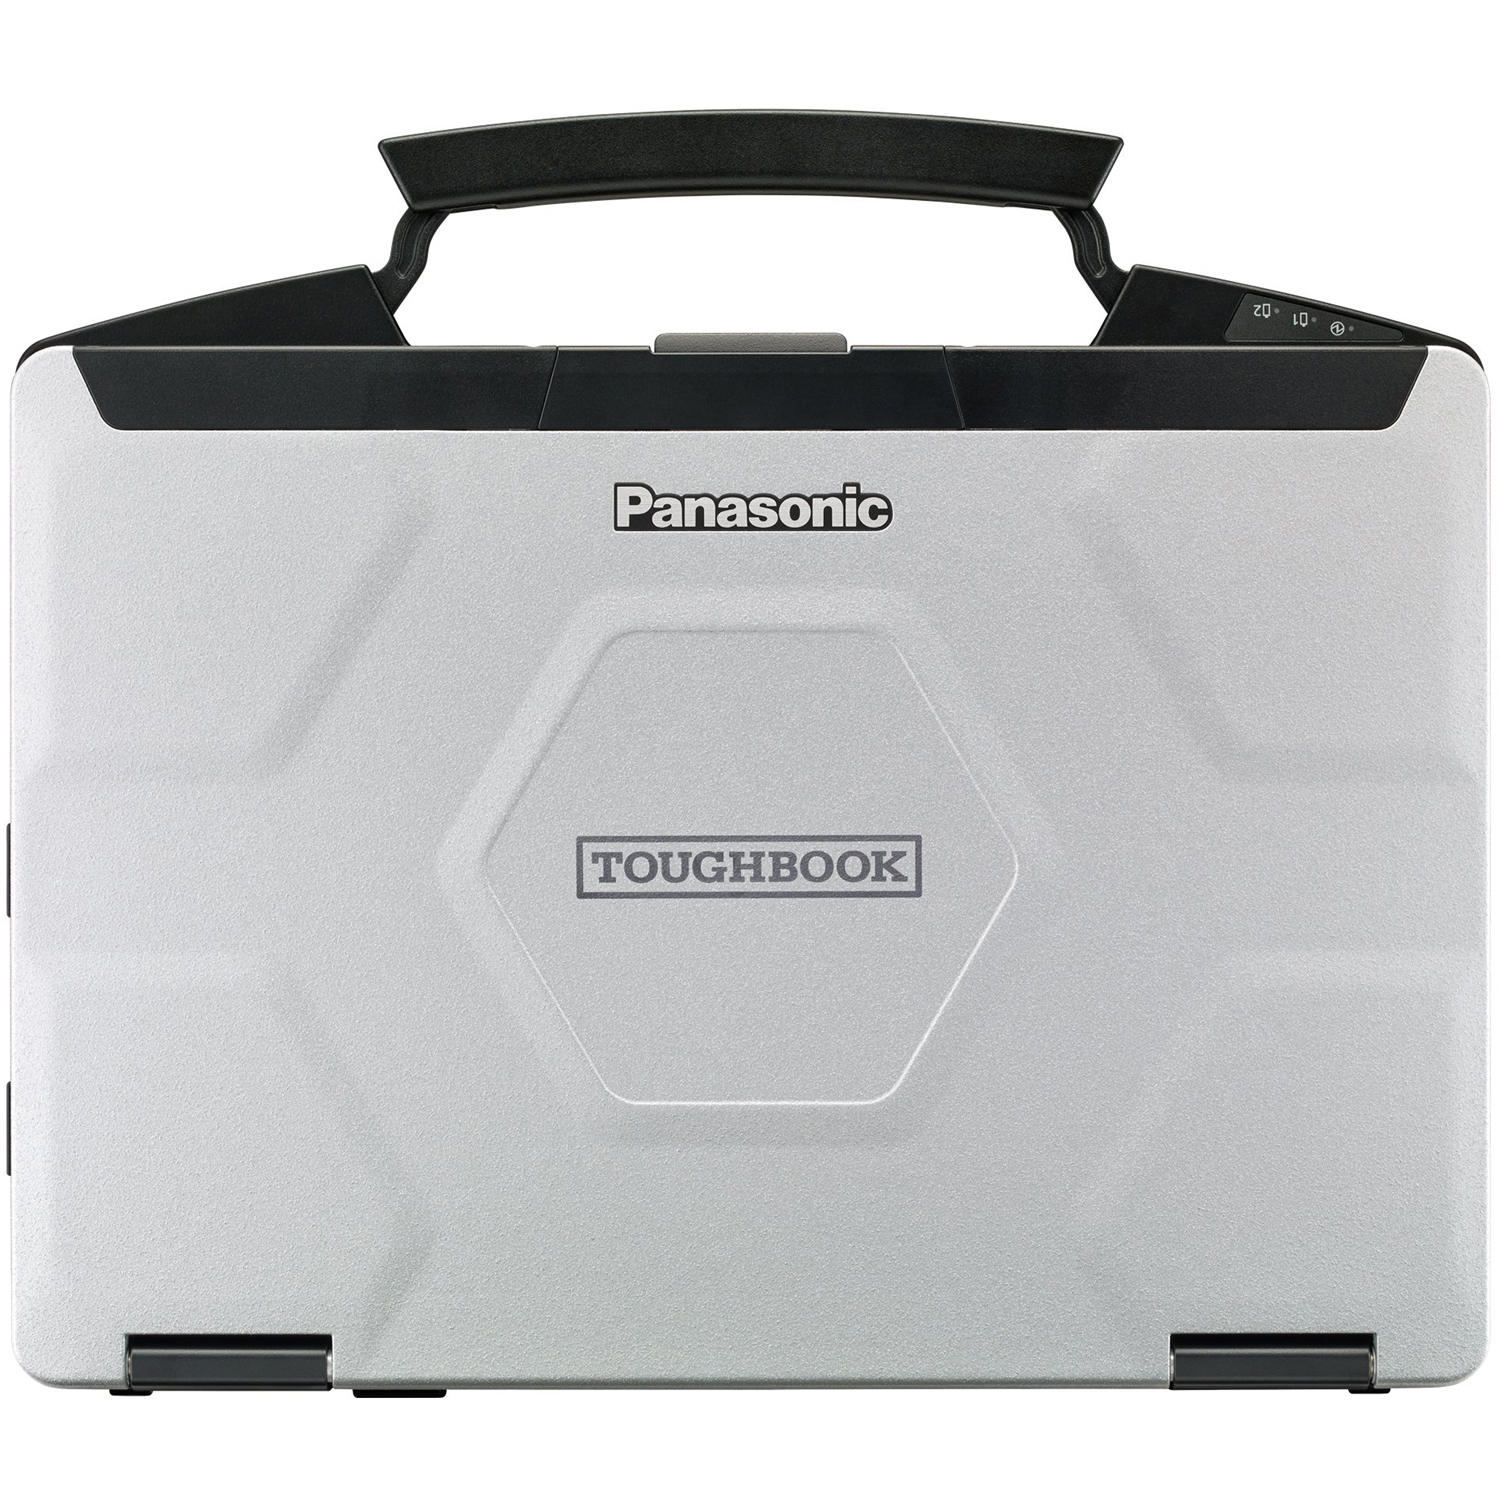 Panasonic Toughbook 54 Prime - Intel Core i5 - 7300U / up to 3.5 GHz - vPro - Win 10 Pro - HD Graphics 620 - 8 GB RAM - 256 GB SSD - DVD SuperMulti - 14" 1366 x 768 (HD) - Wi-Fi 5 - 4G LTE - with Toughbook Preferred - image 2 of 6